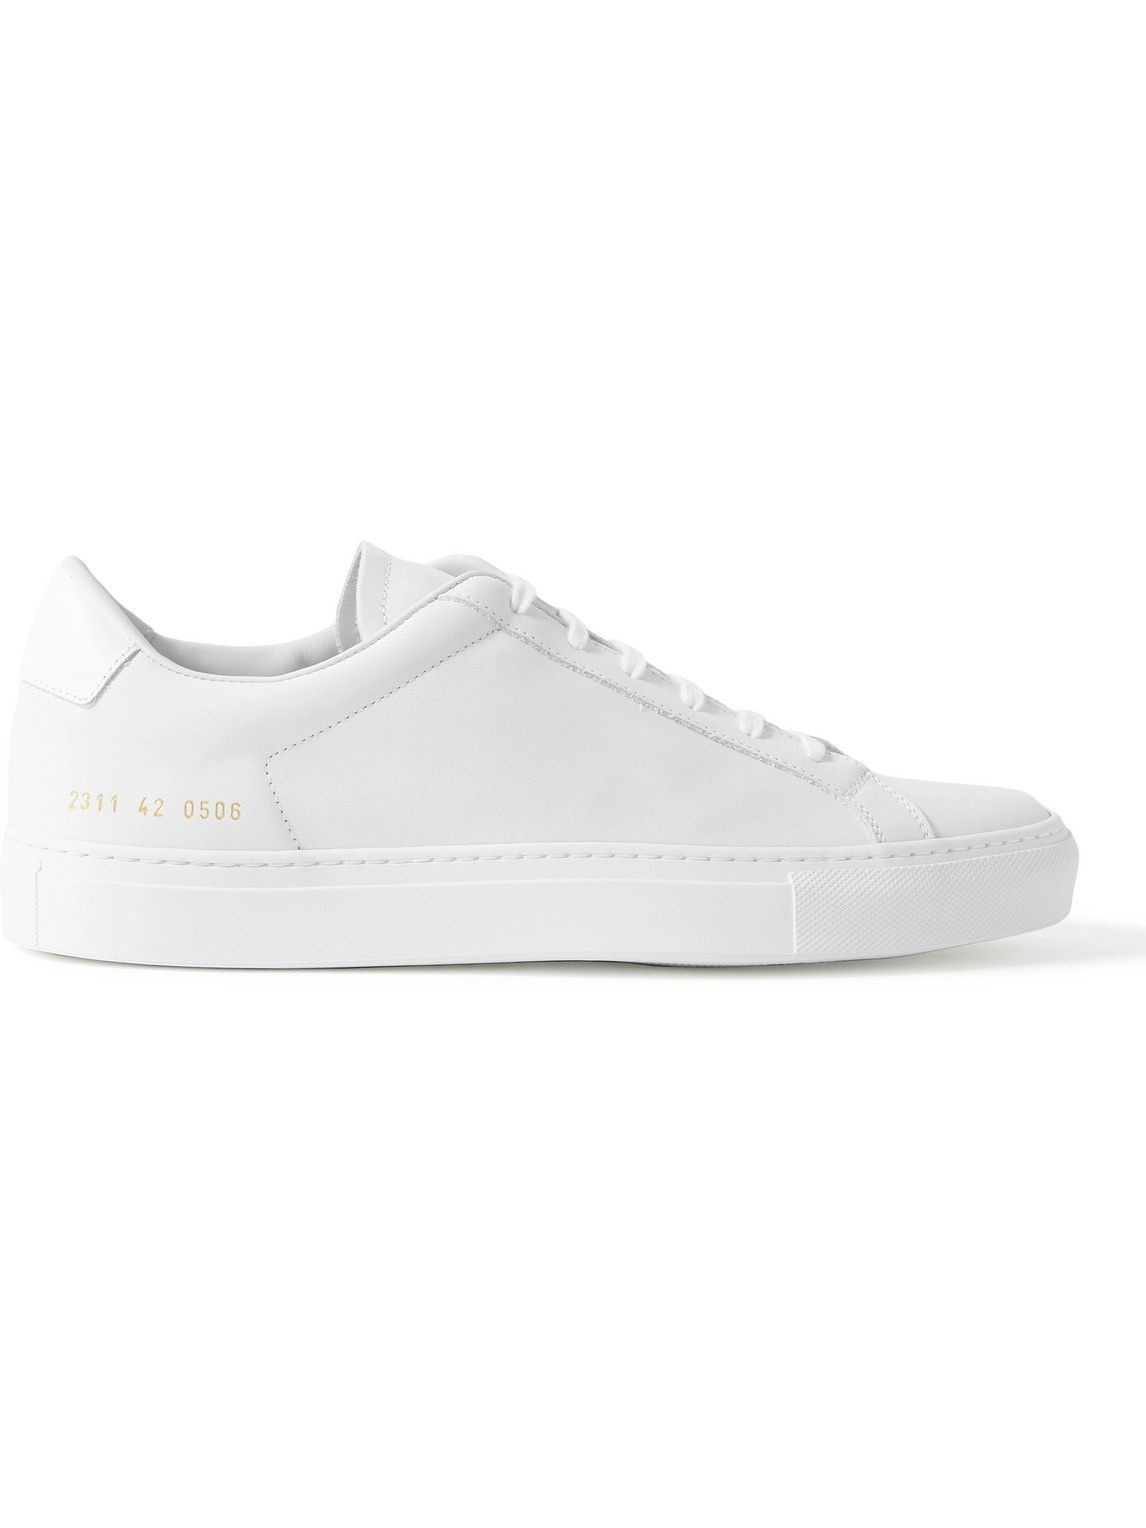 Common Projects - Retro Nubuck Sneakers - White Common Projects